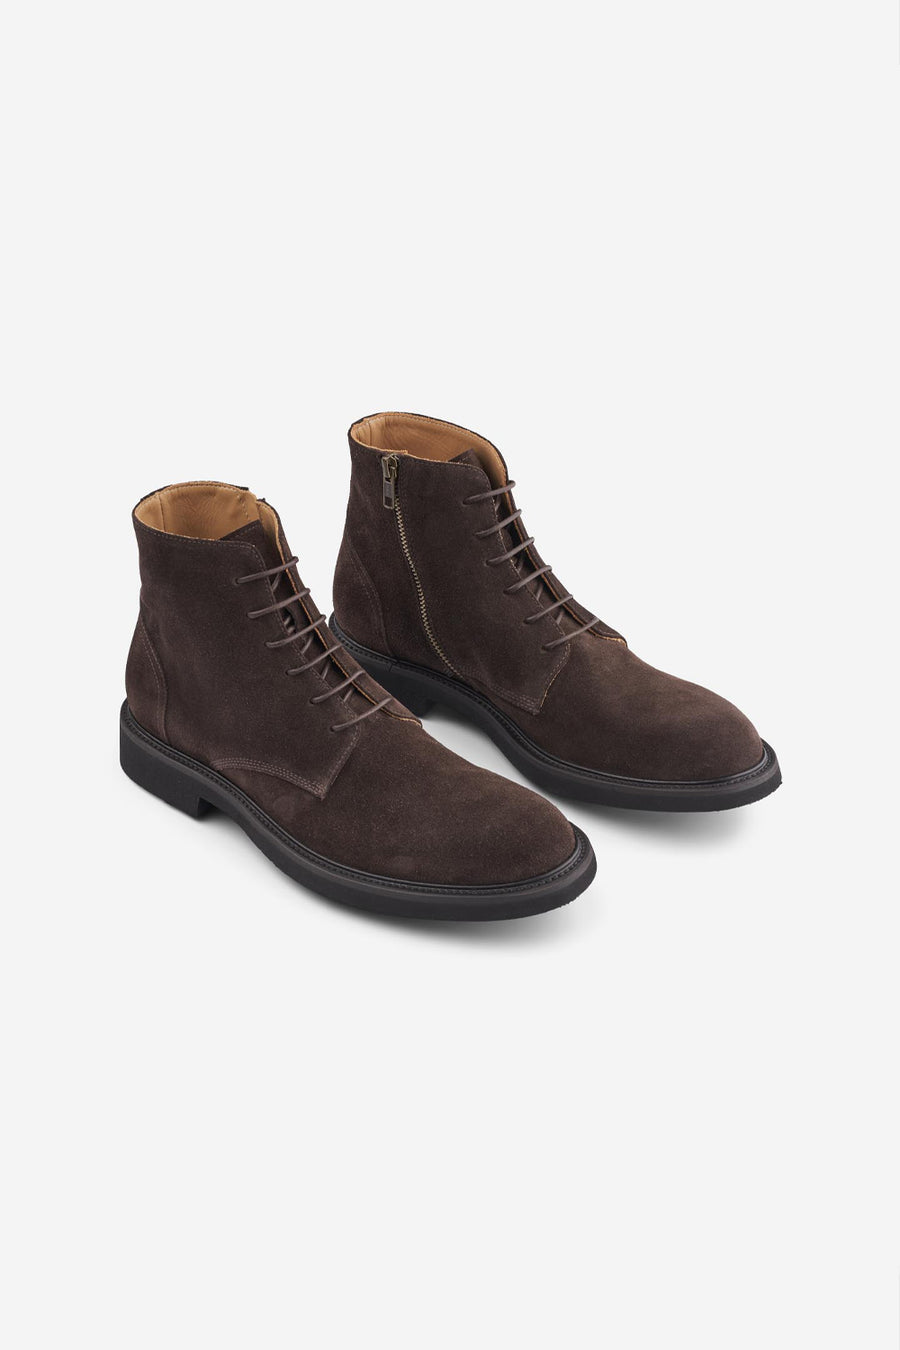 Buy the Sand Copenhagen Leather Boot in Brown at Intro. Spend £50 for free UK delivery. Official stockists. We ship worldwide.